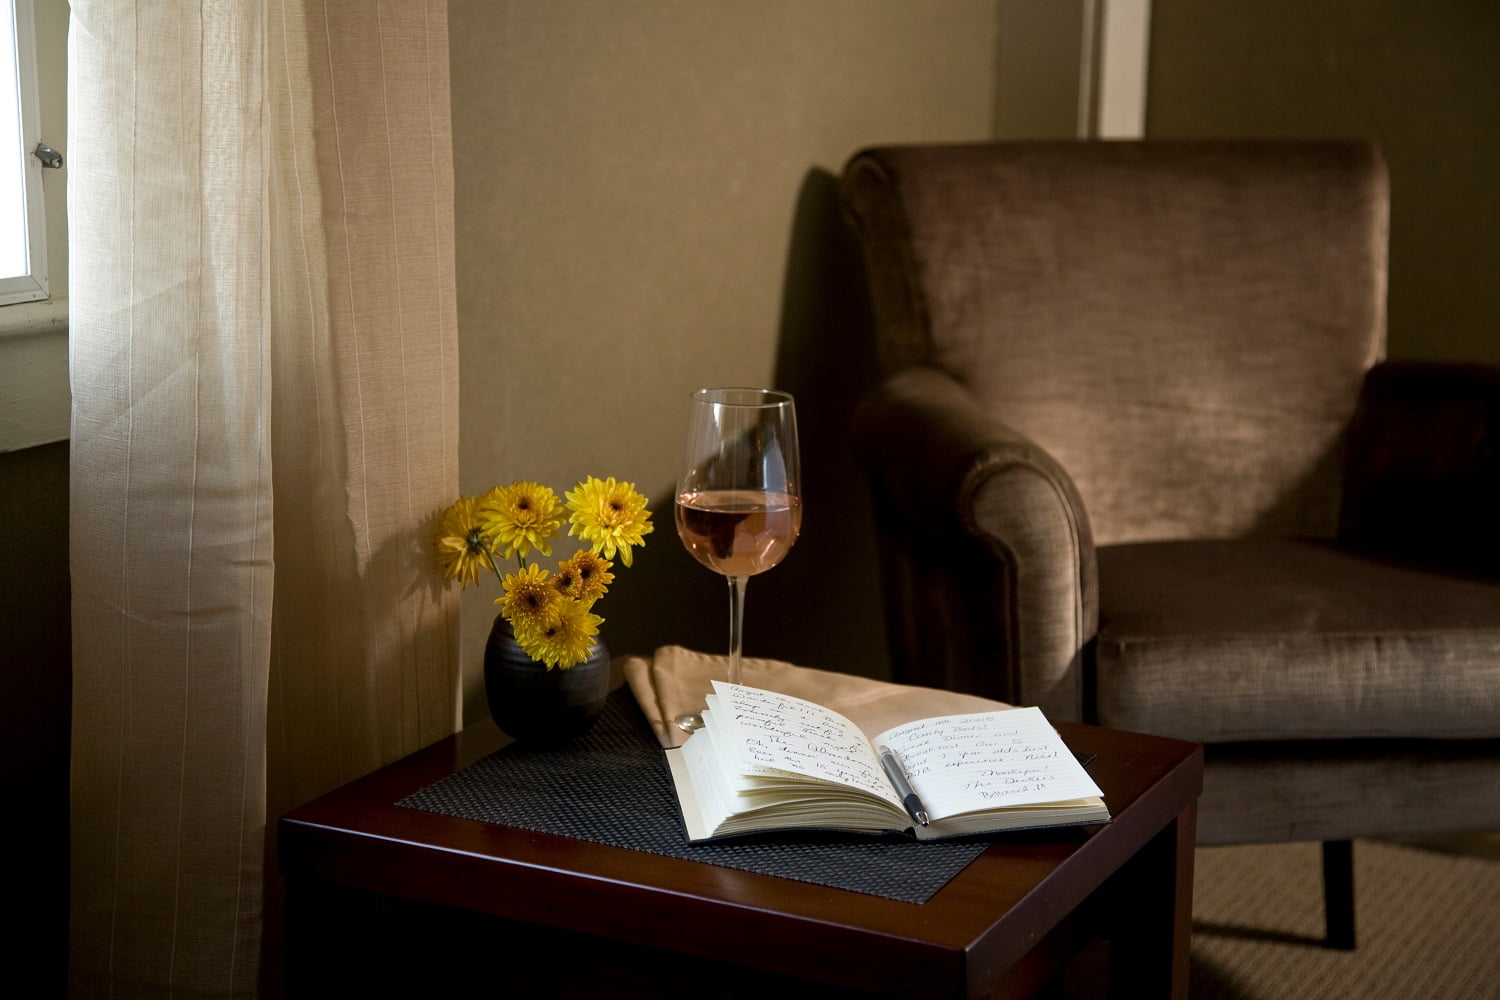 Wine and a book